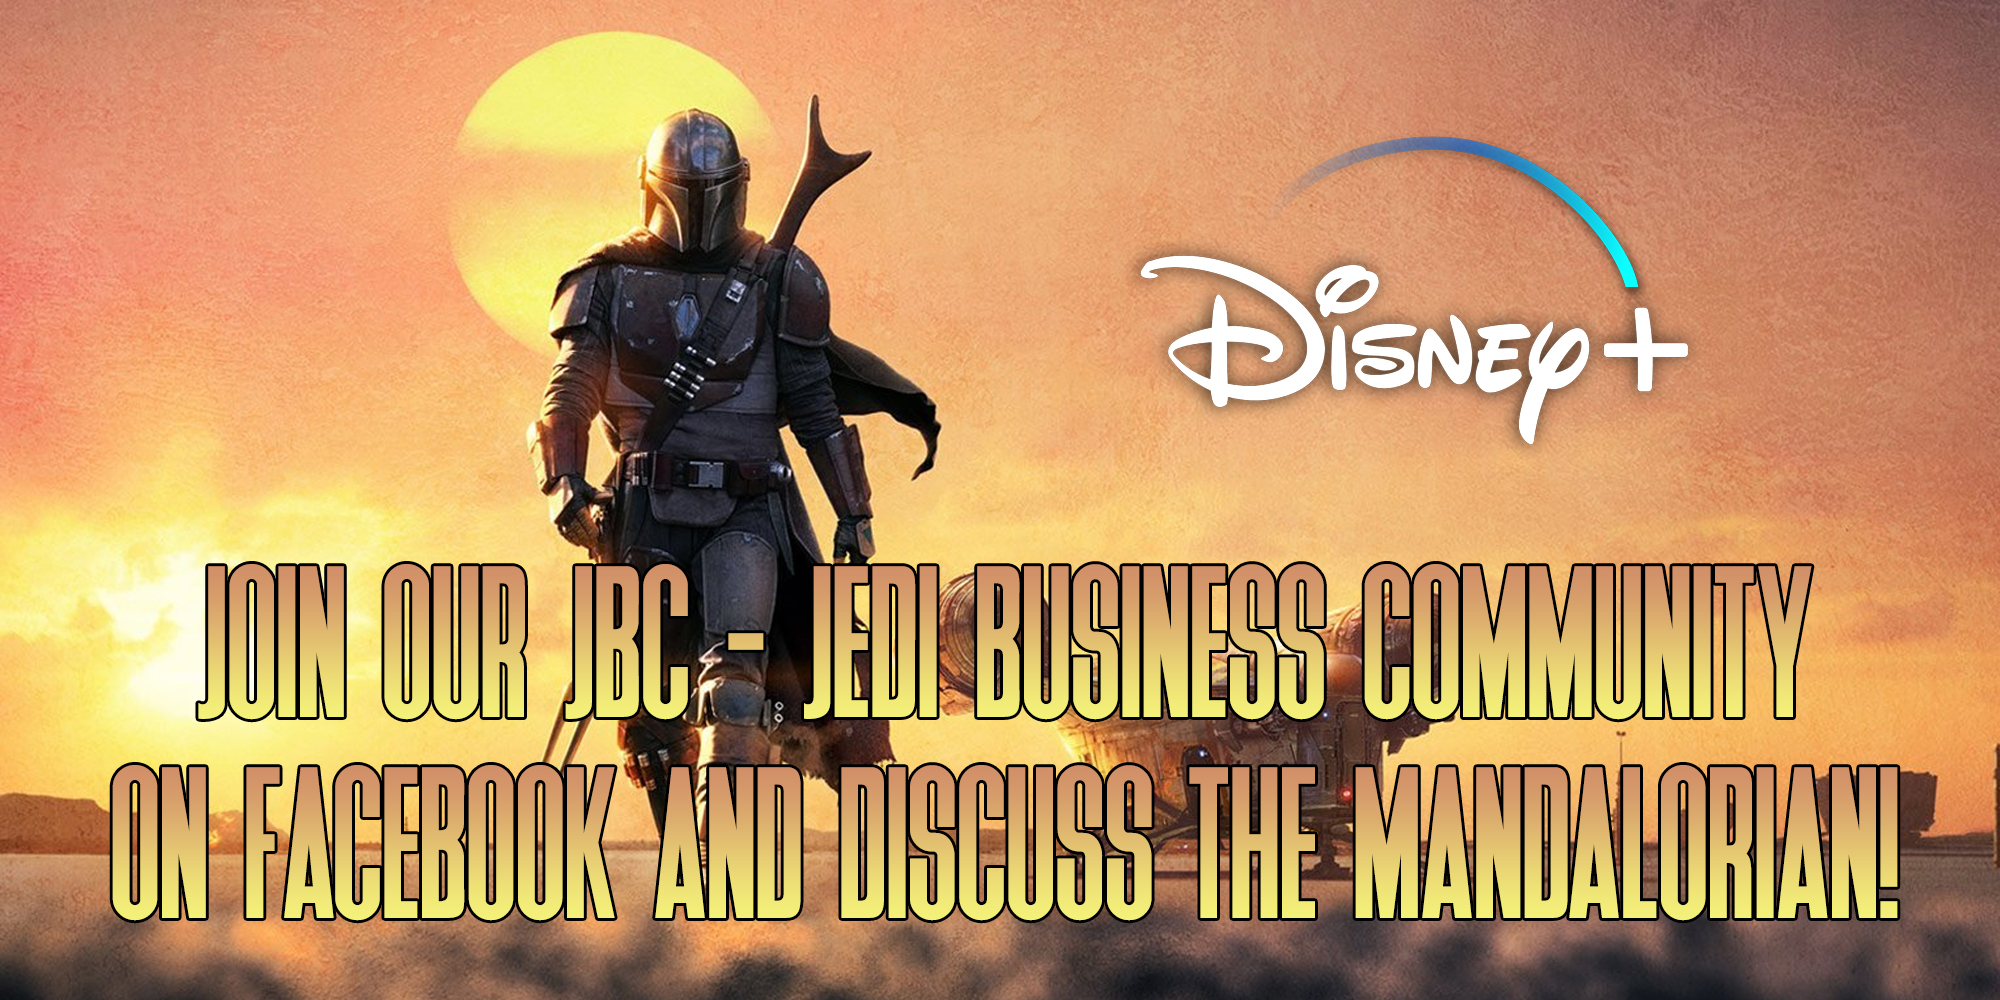 Discuss The Mandalorian With The Jedi Business Community!